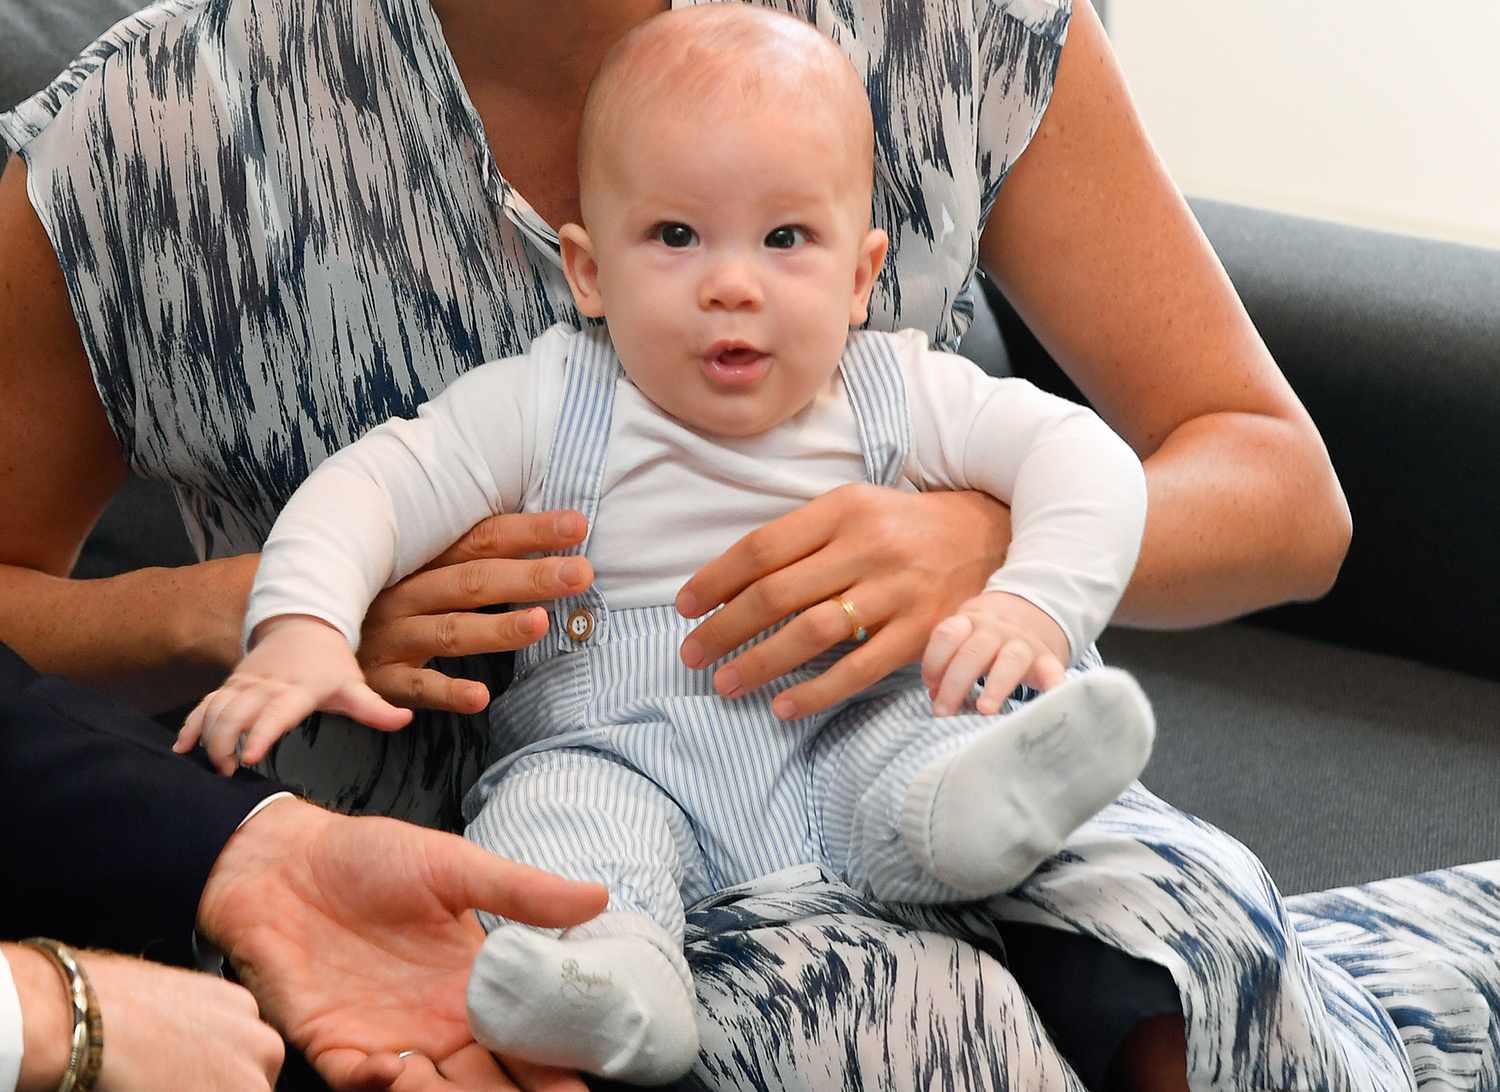 Prince Harry, Duke of Sussex, Meghan, Duchess of Sussex and their baby son Archie Mountbatten-Windsor meet Archbishop Desmond Tutu and his daughter Thandeka Tutu-Gxashe at the Desmond & Leah Tutu Legacy Foundation during their royal tour of South Africa on September 25, 2019 in Cape Town, South Africa.